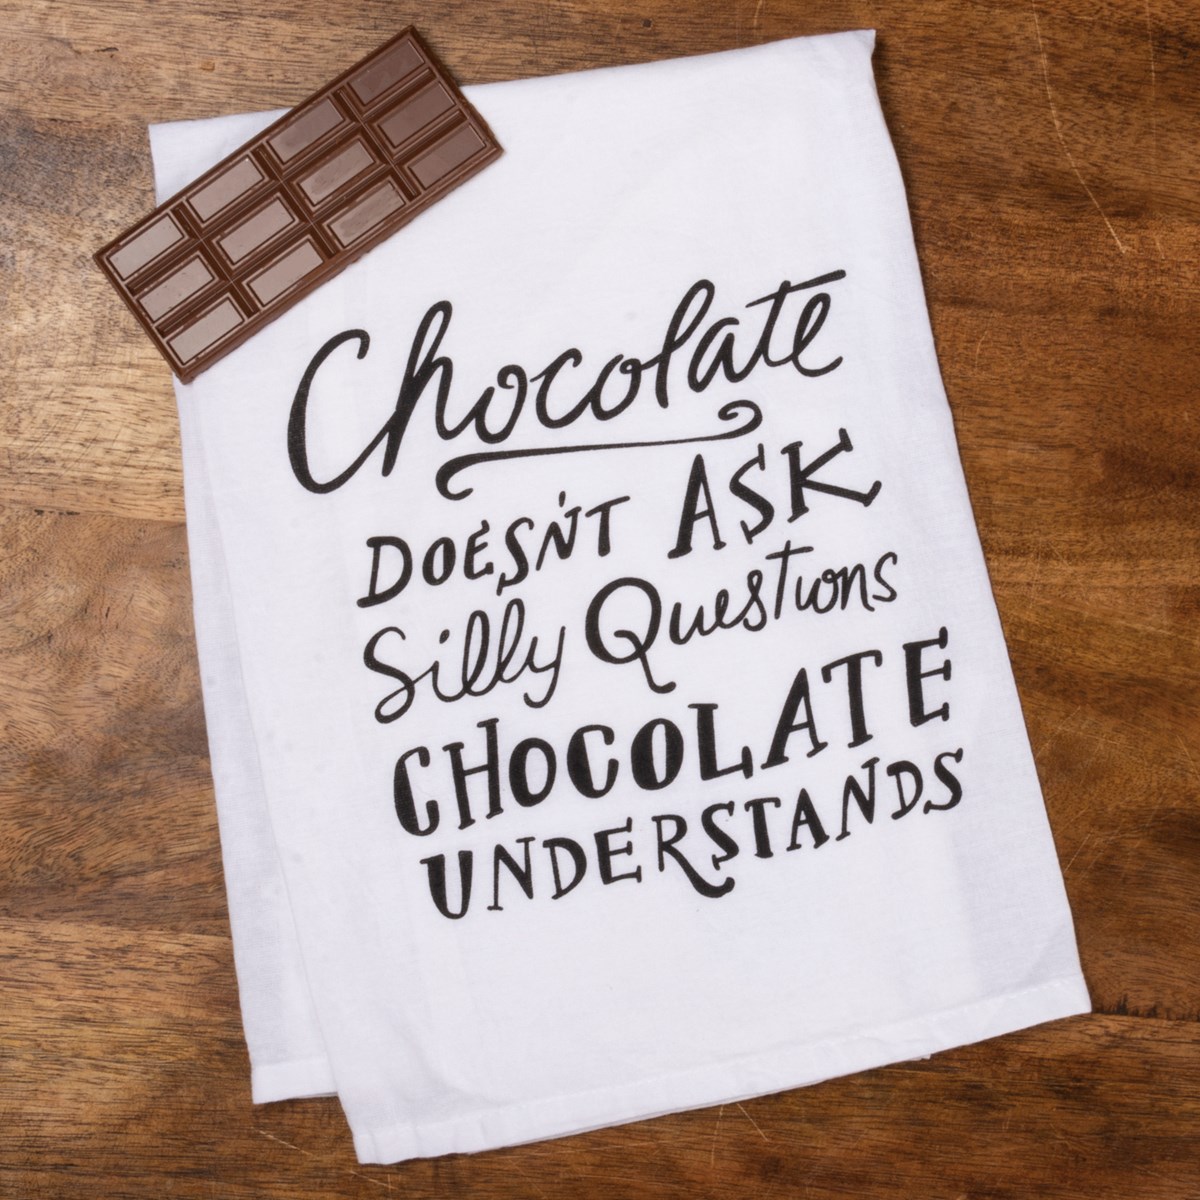 Chocolate Doesn't Ask Questions Kitchen Towel - Cotton